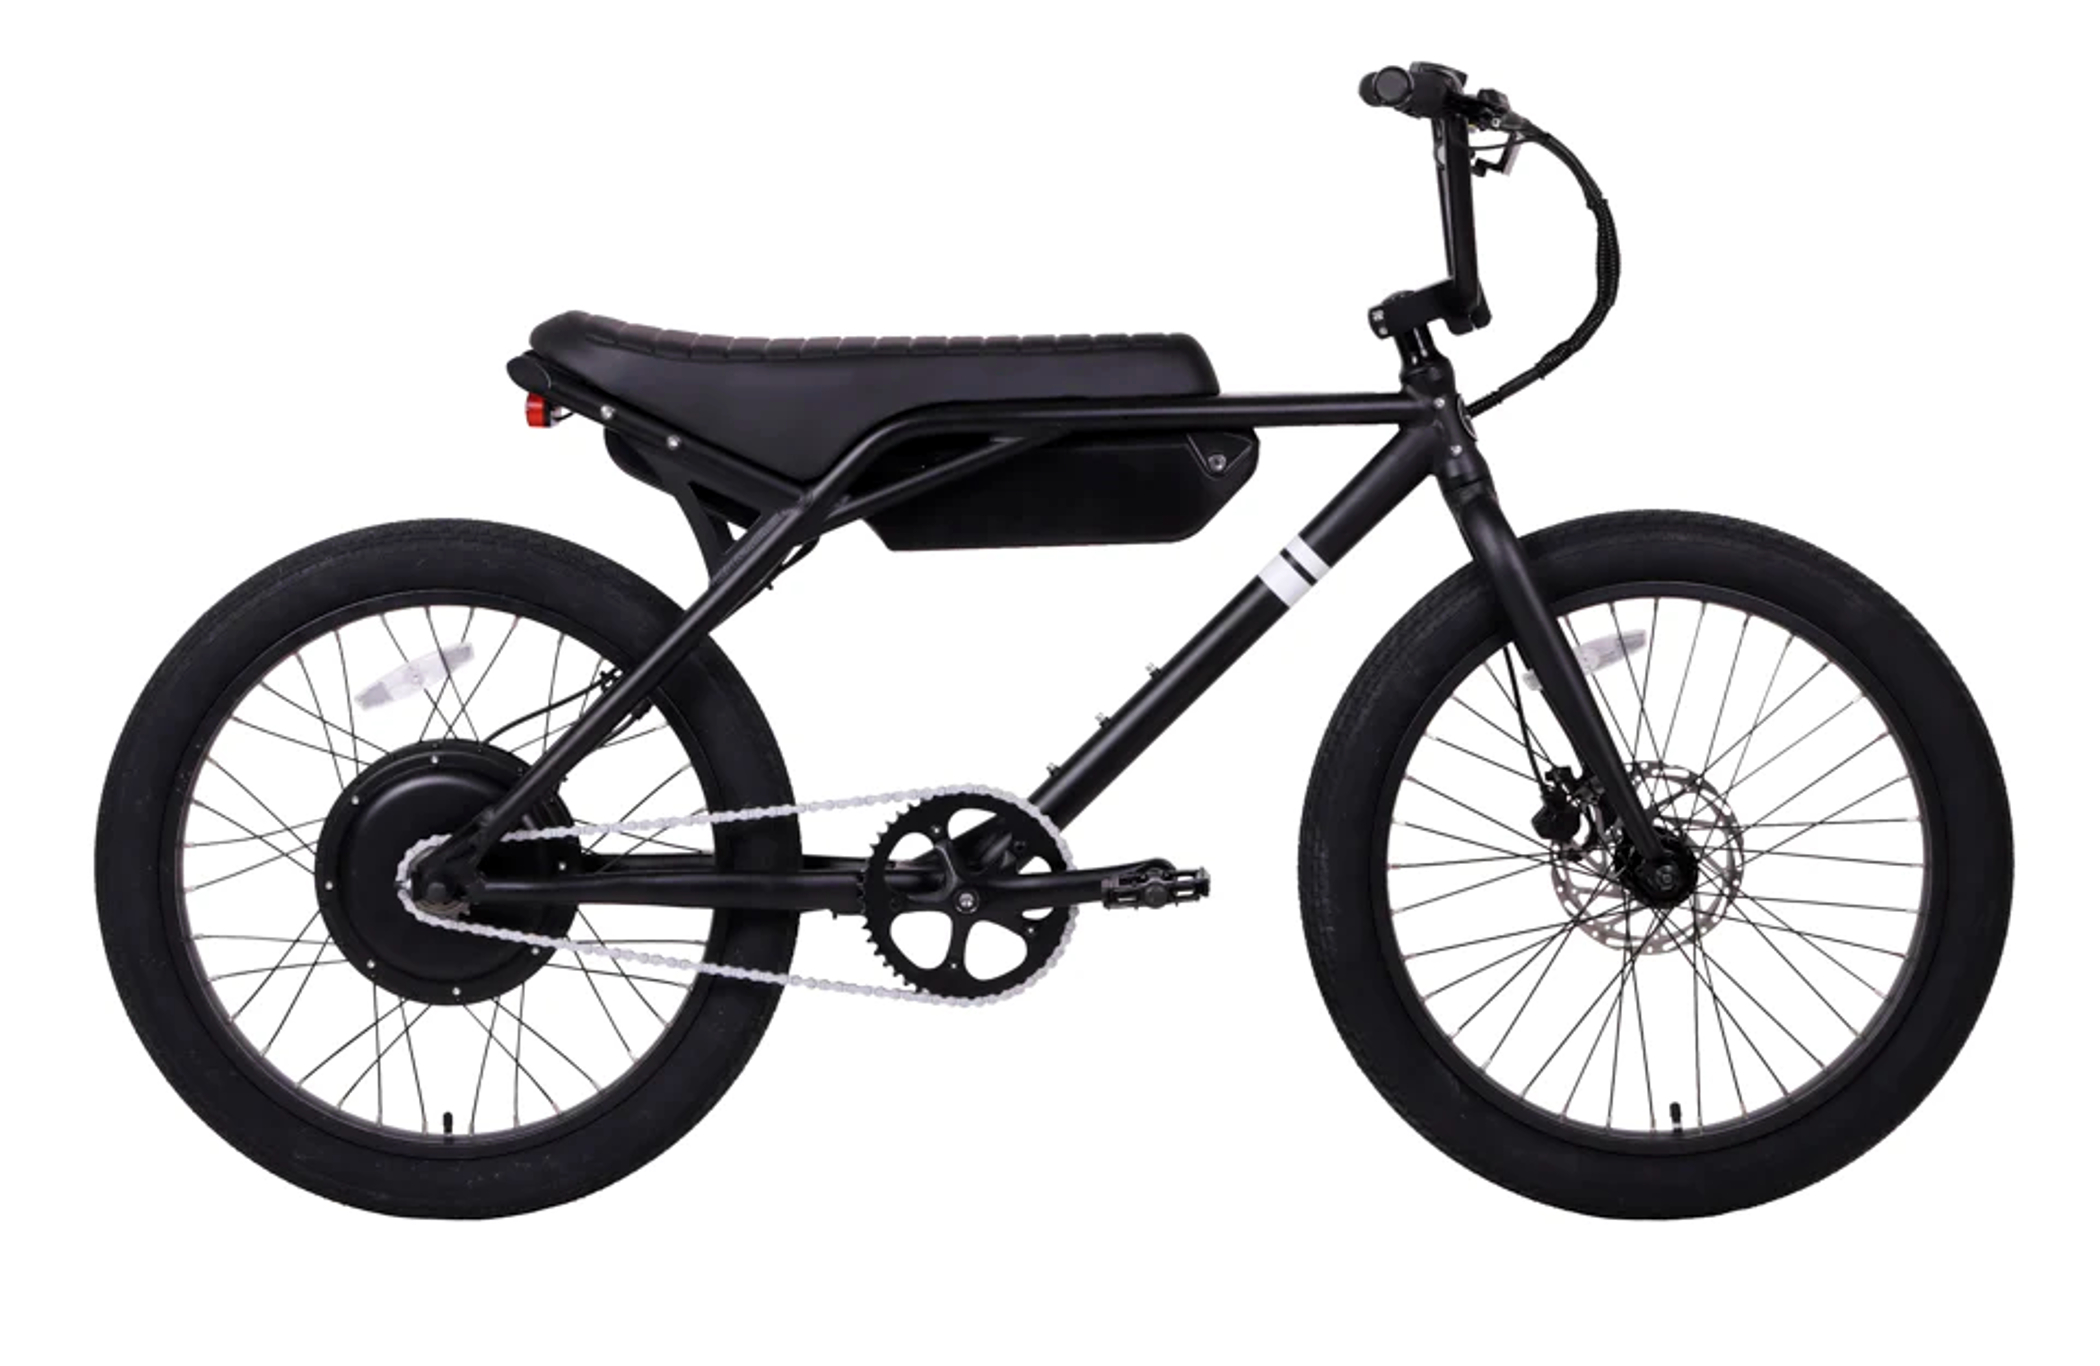 Sole e-24 electric bike in the Overthrow colorway against a white background.